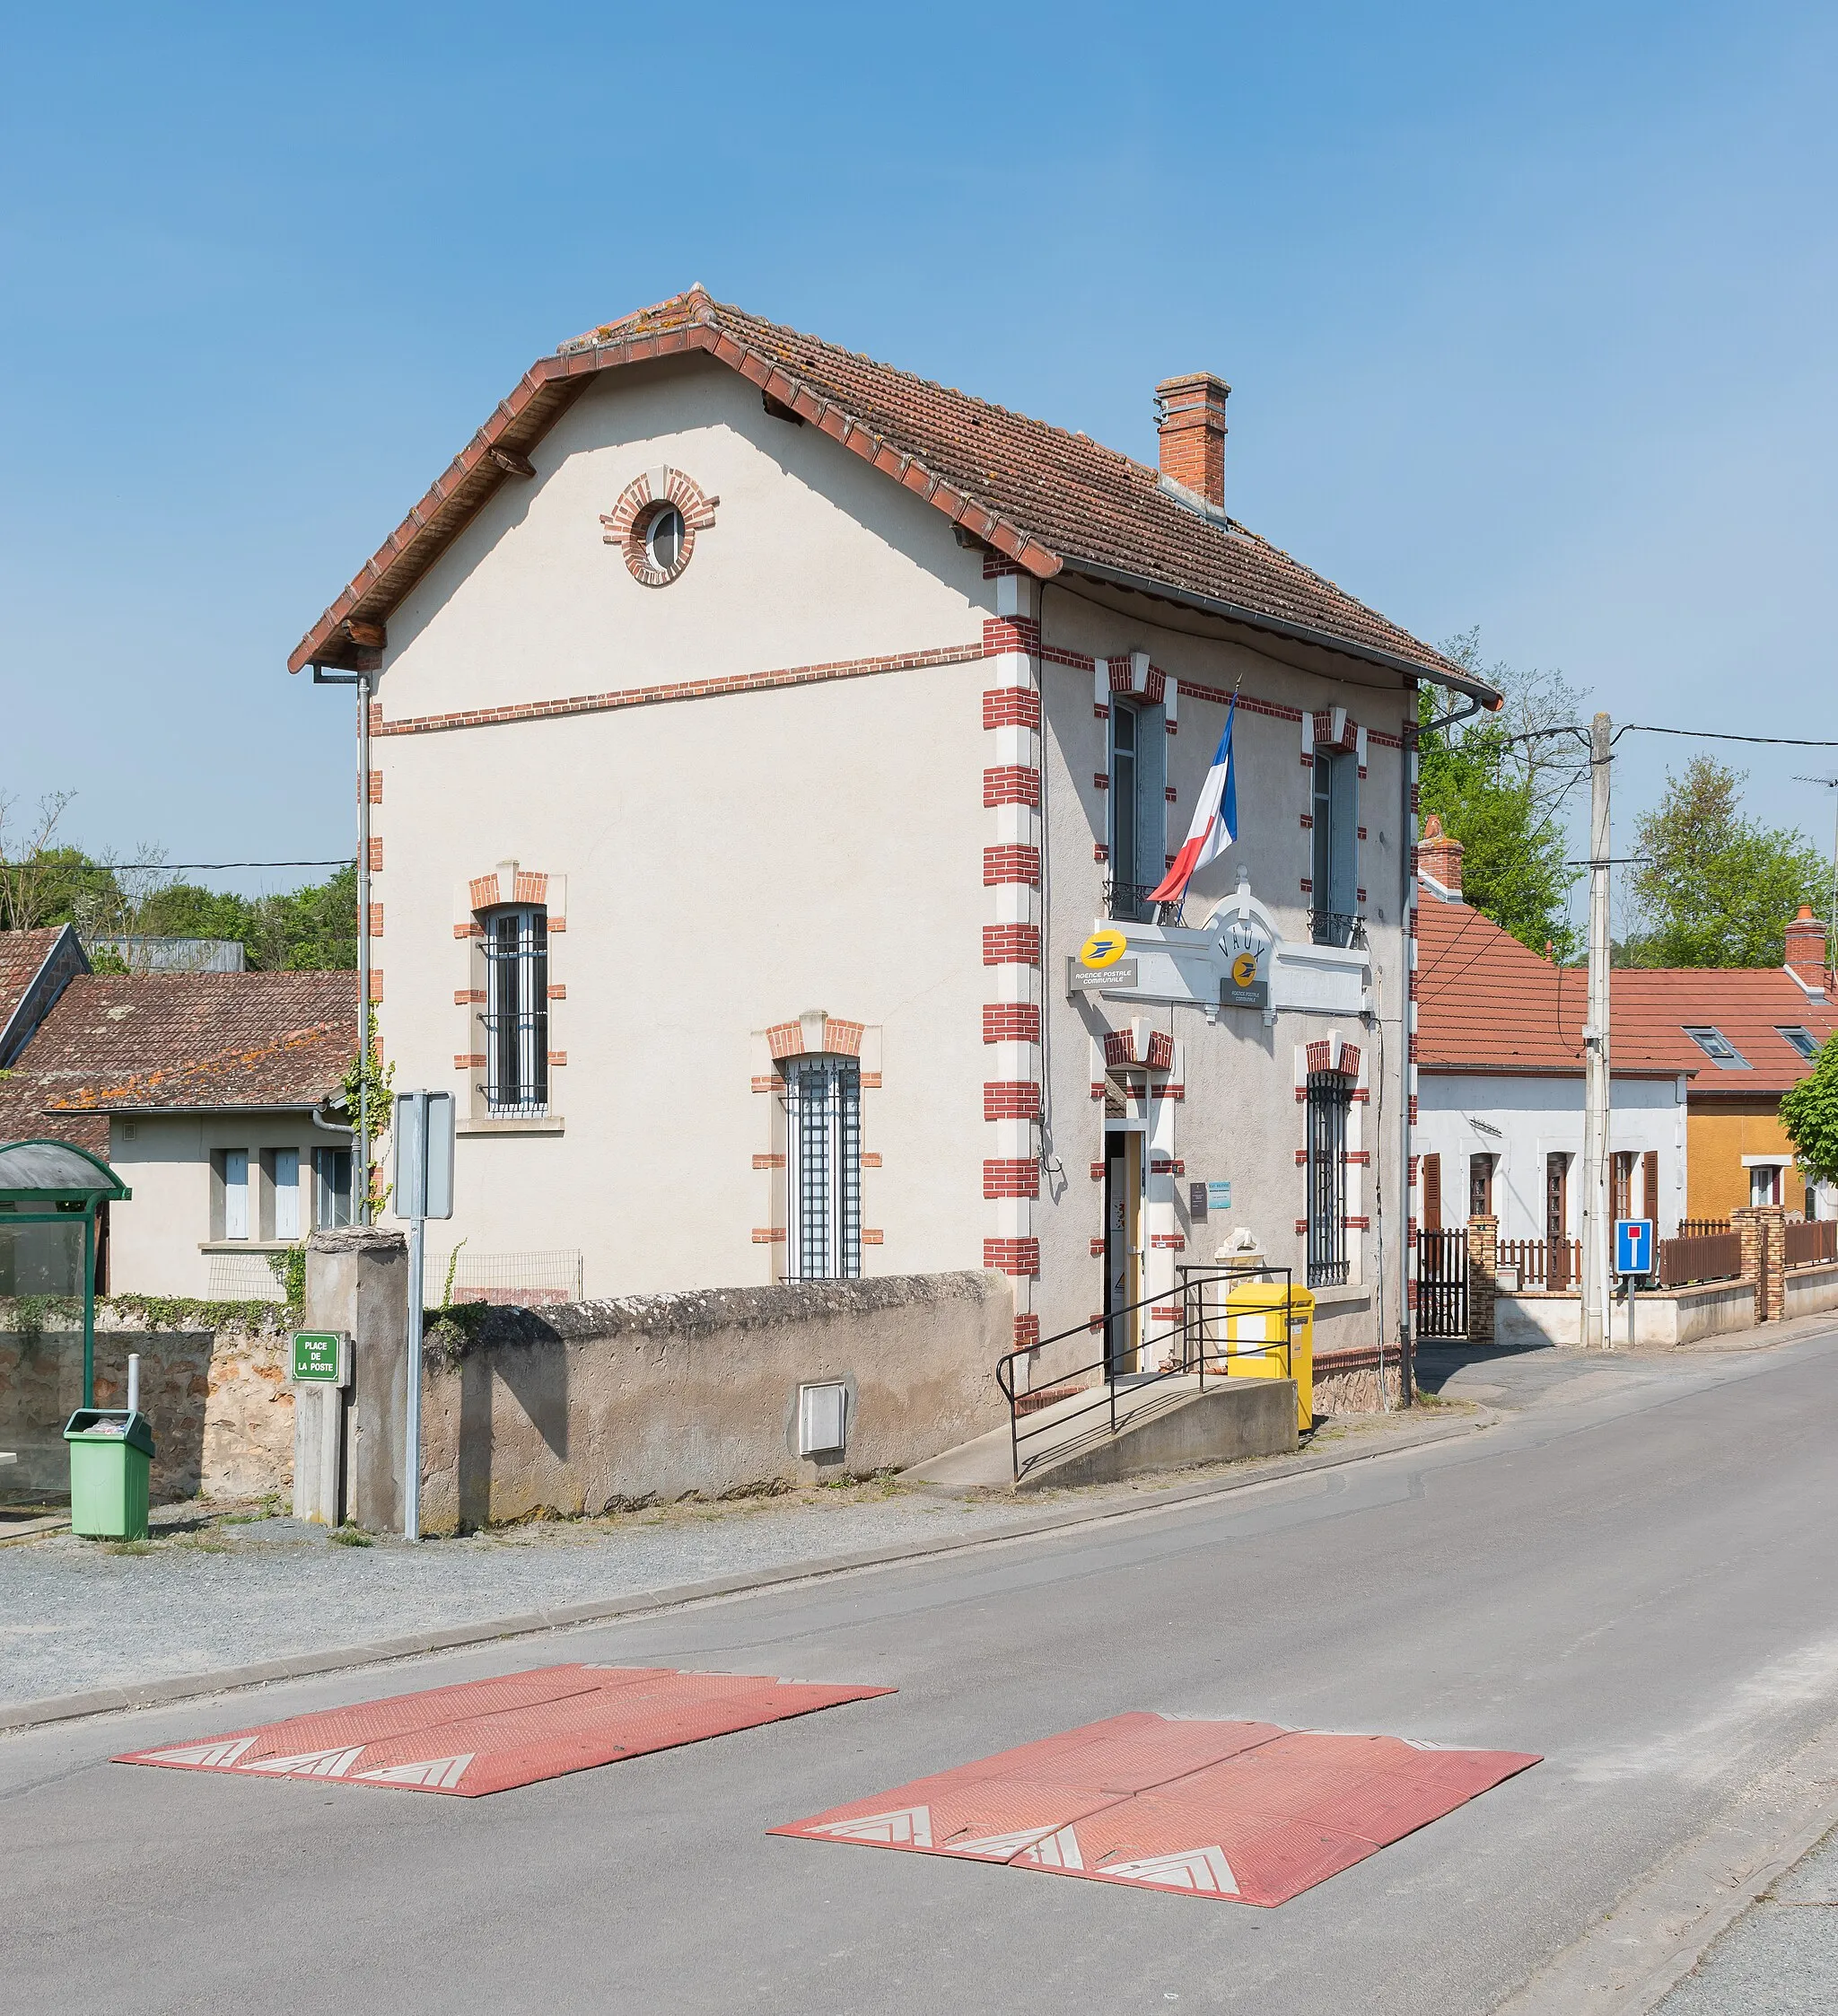 Photo showing: Post office in Vaux, Allier, France